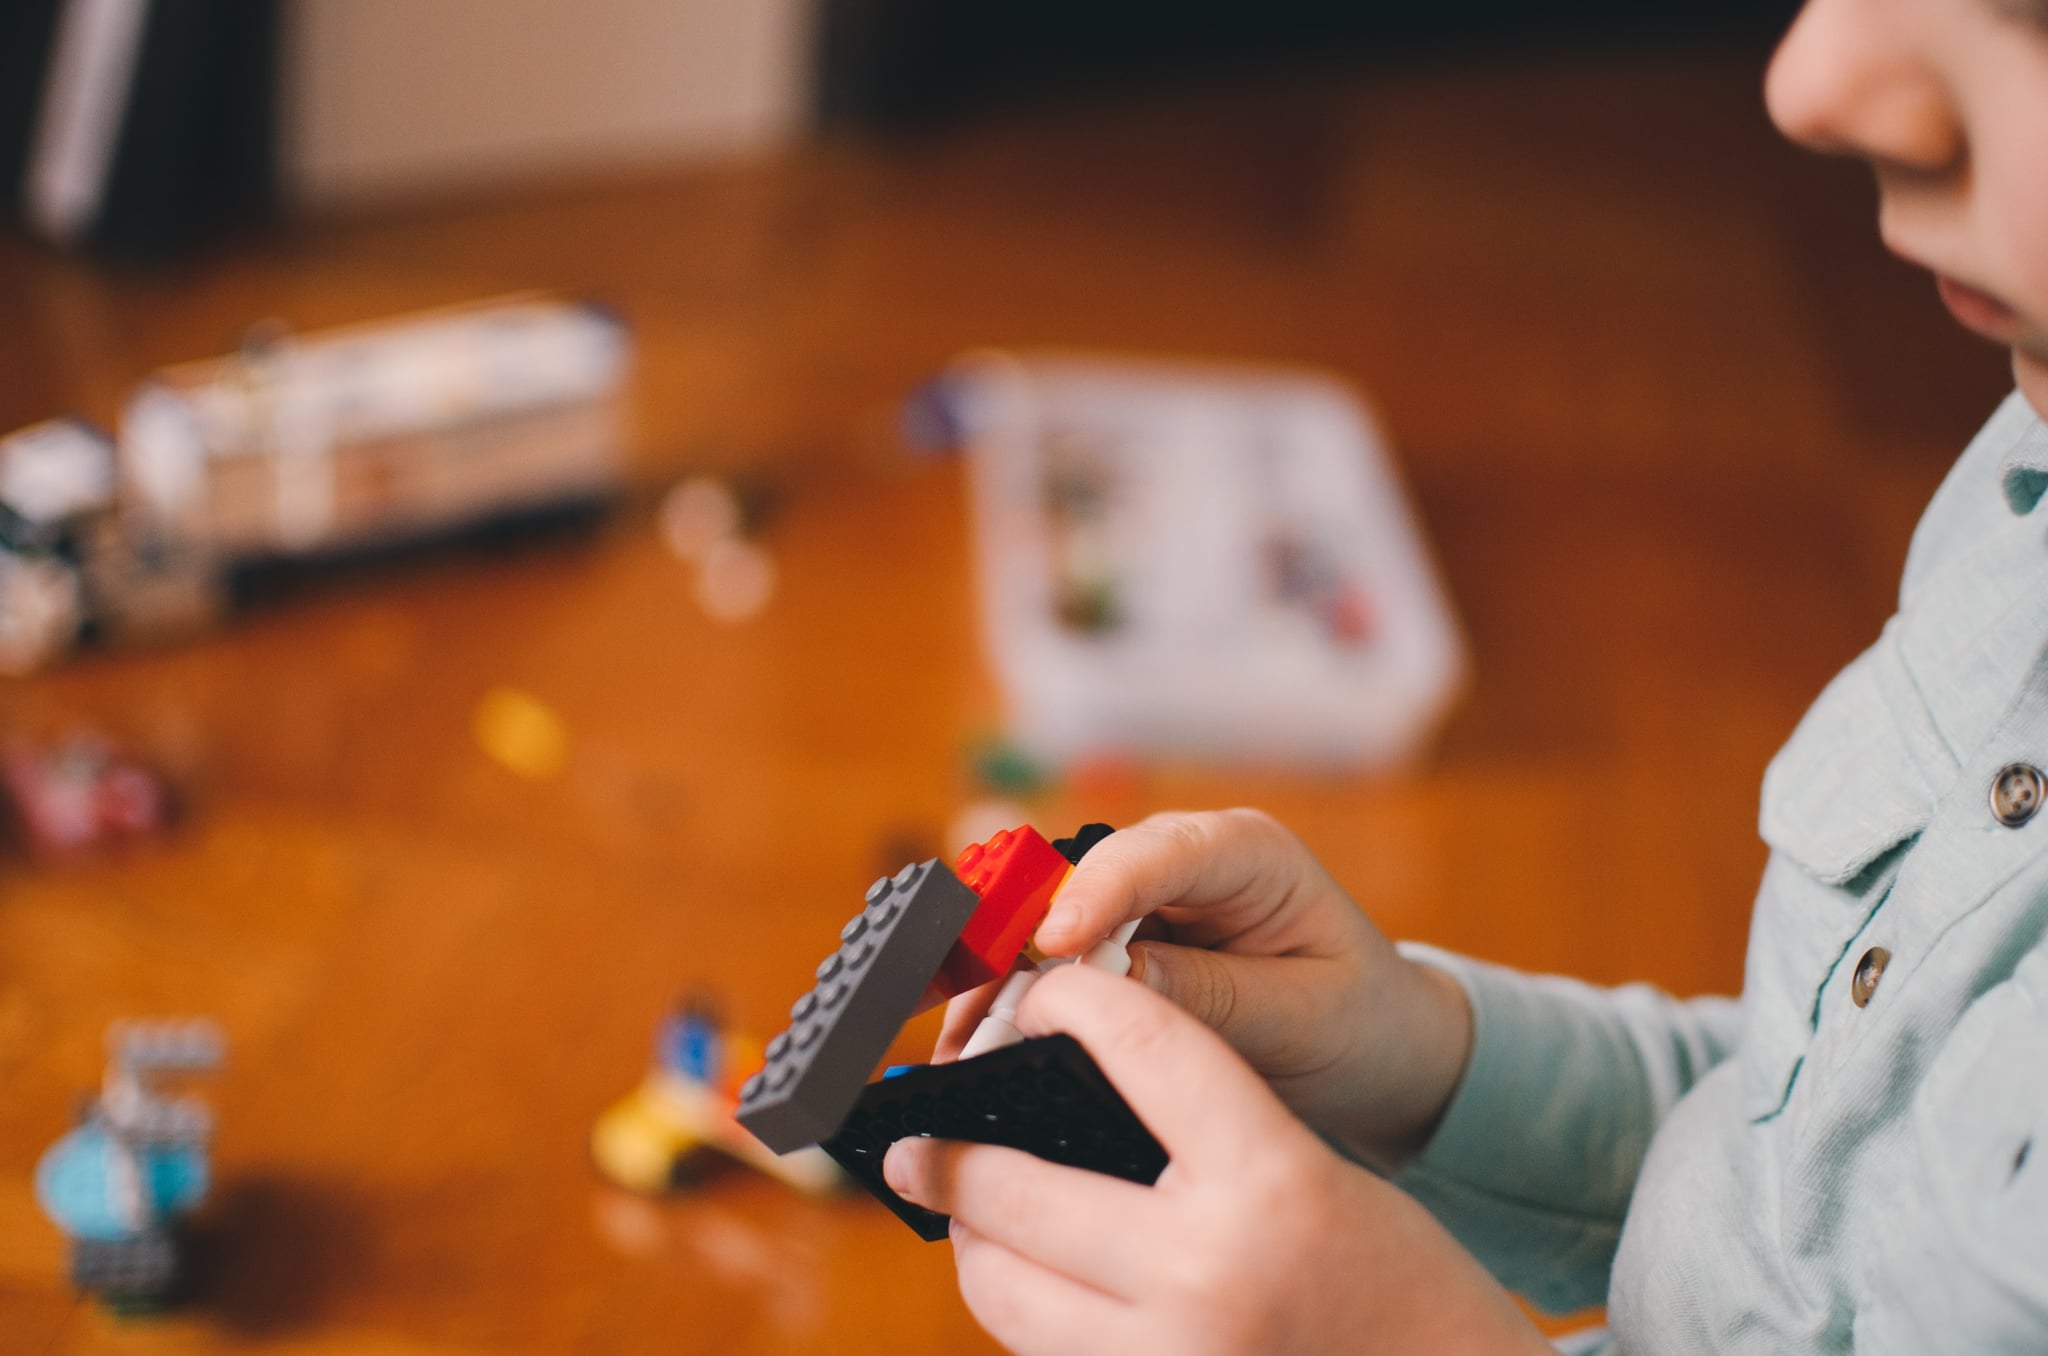 A List of Indoor Activities That Will Keep Kids Entertained While Stuck at Home